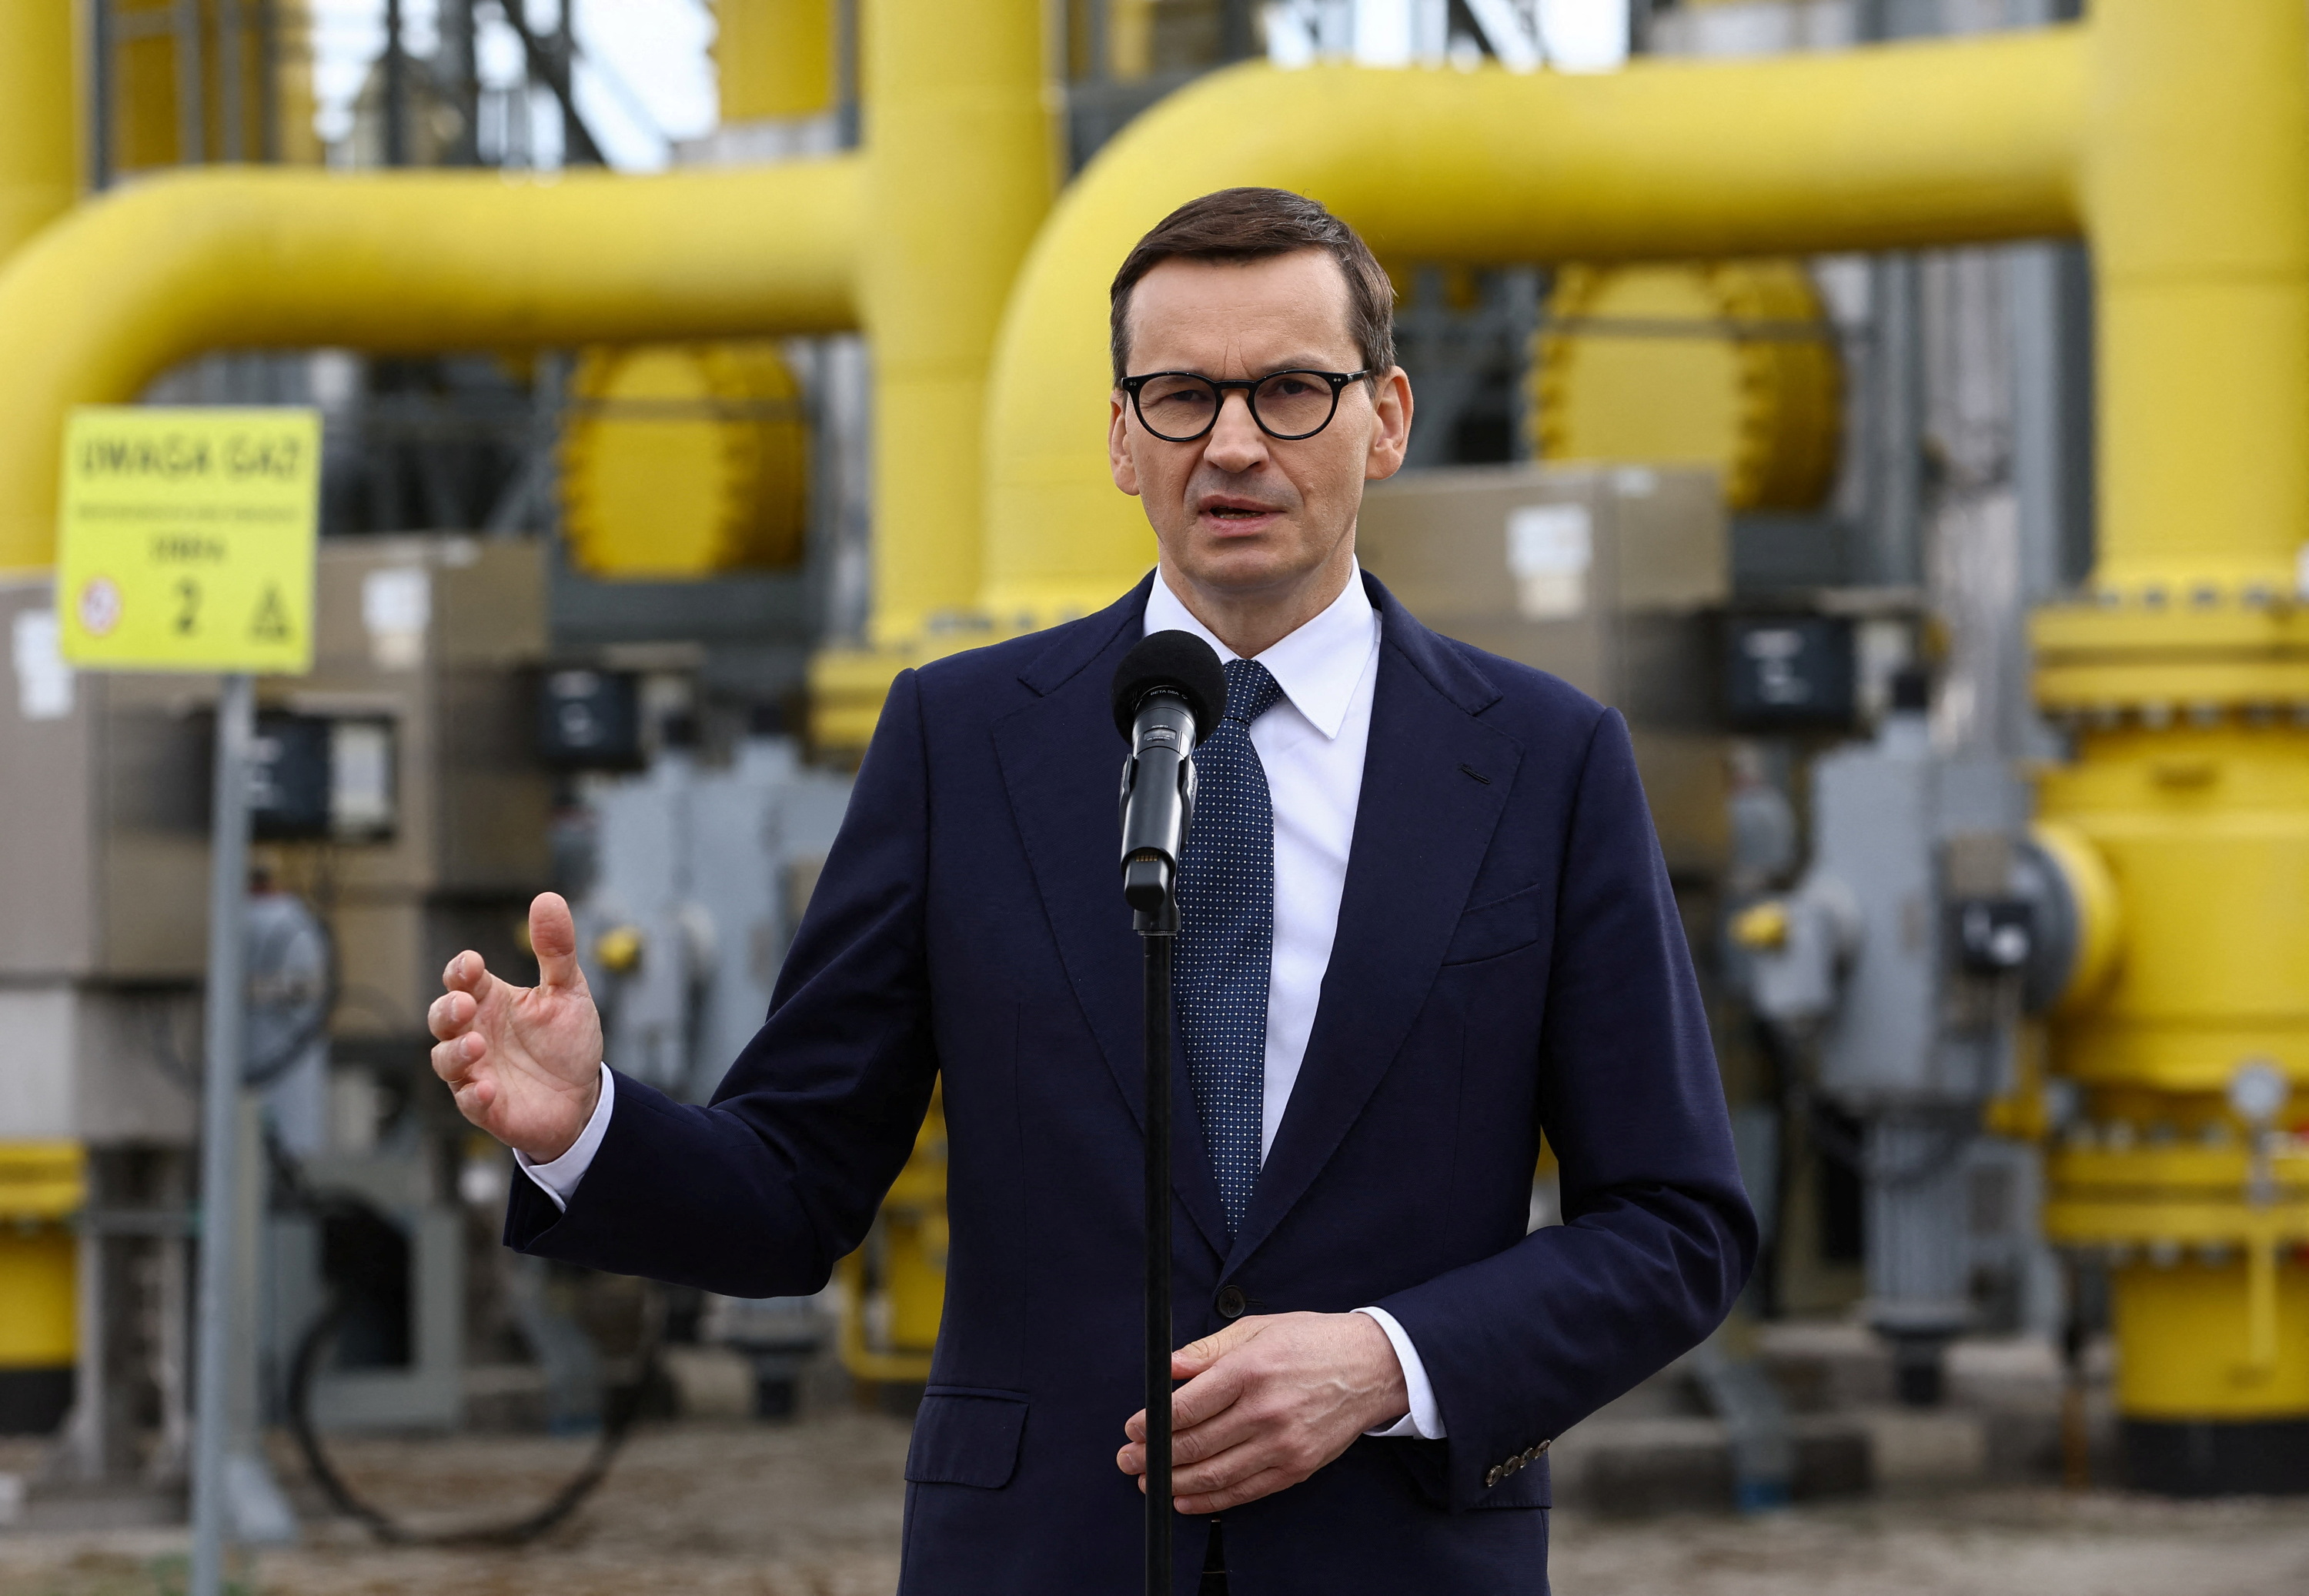 Poland's Prime Minister Mateusz Morawiecki speaks during a news conference near the gas installation at a Gaz-System gas compressor station in Rembelszczyzna